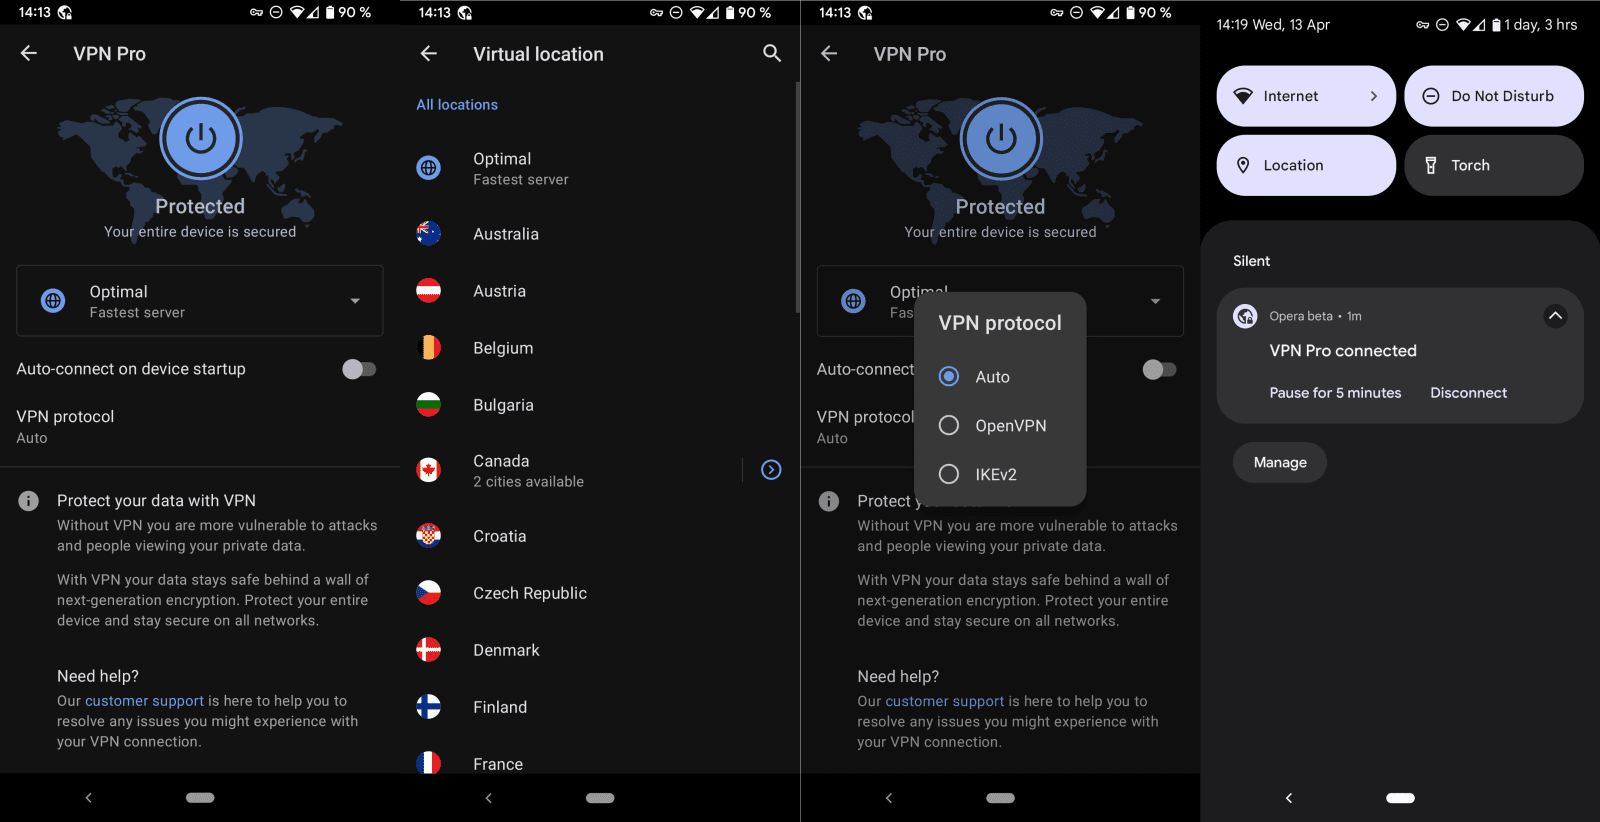 Opera Software launches Opera VPN Pro for Android